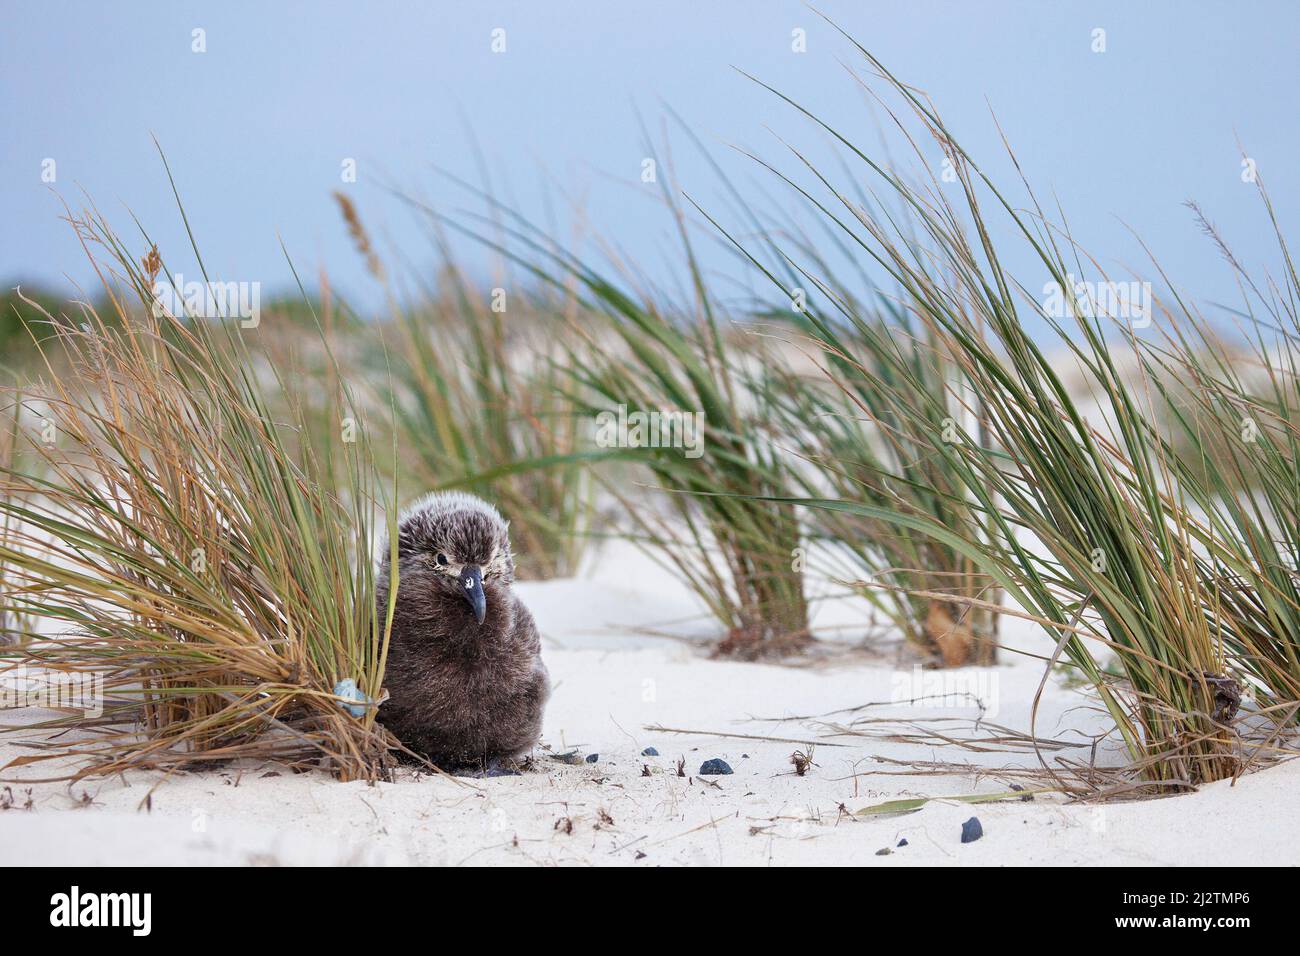 Laysan Albatross chick huddling against a Bunch Grass plant (Eragrostis variabilis) for shelter during a wind storm on a Pacific island shore. Stock Photo